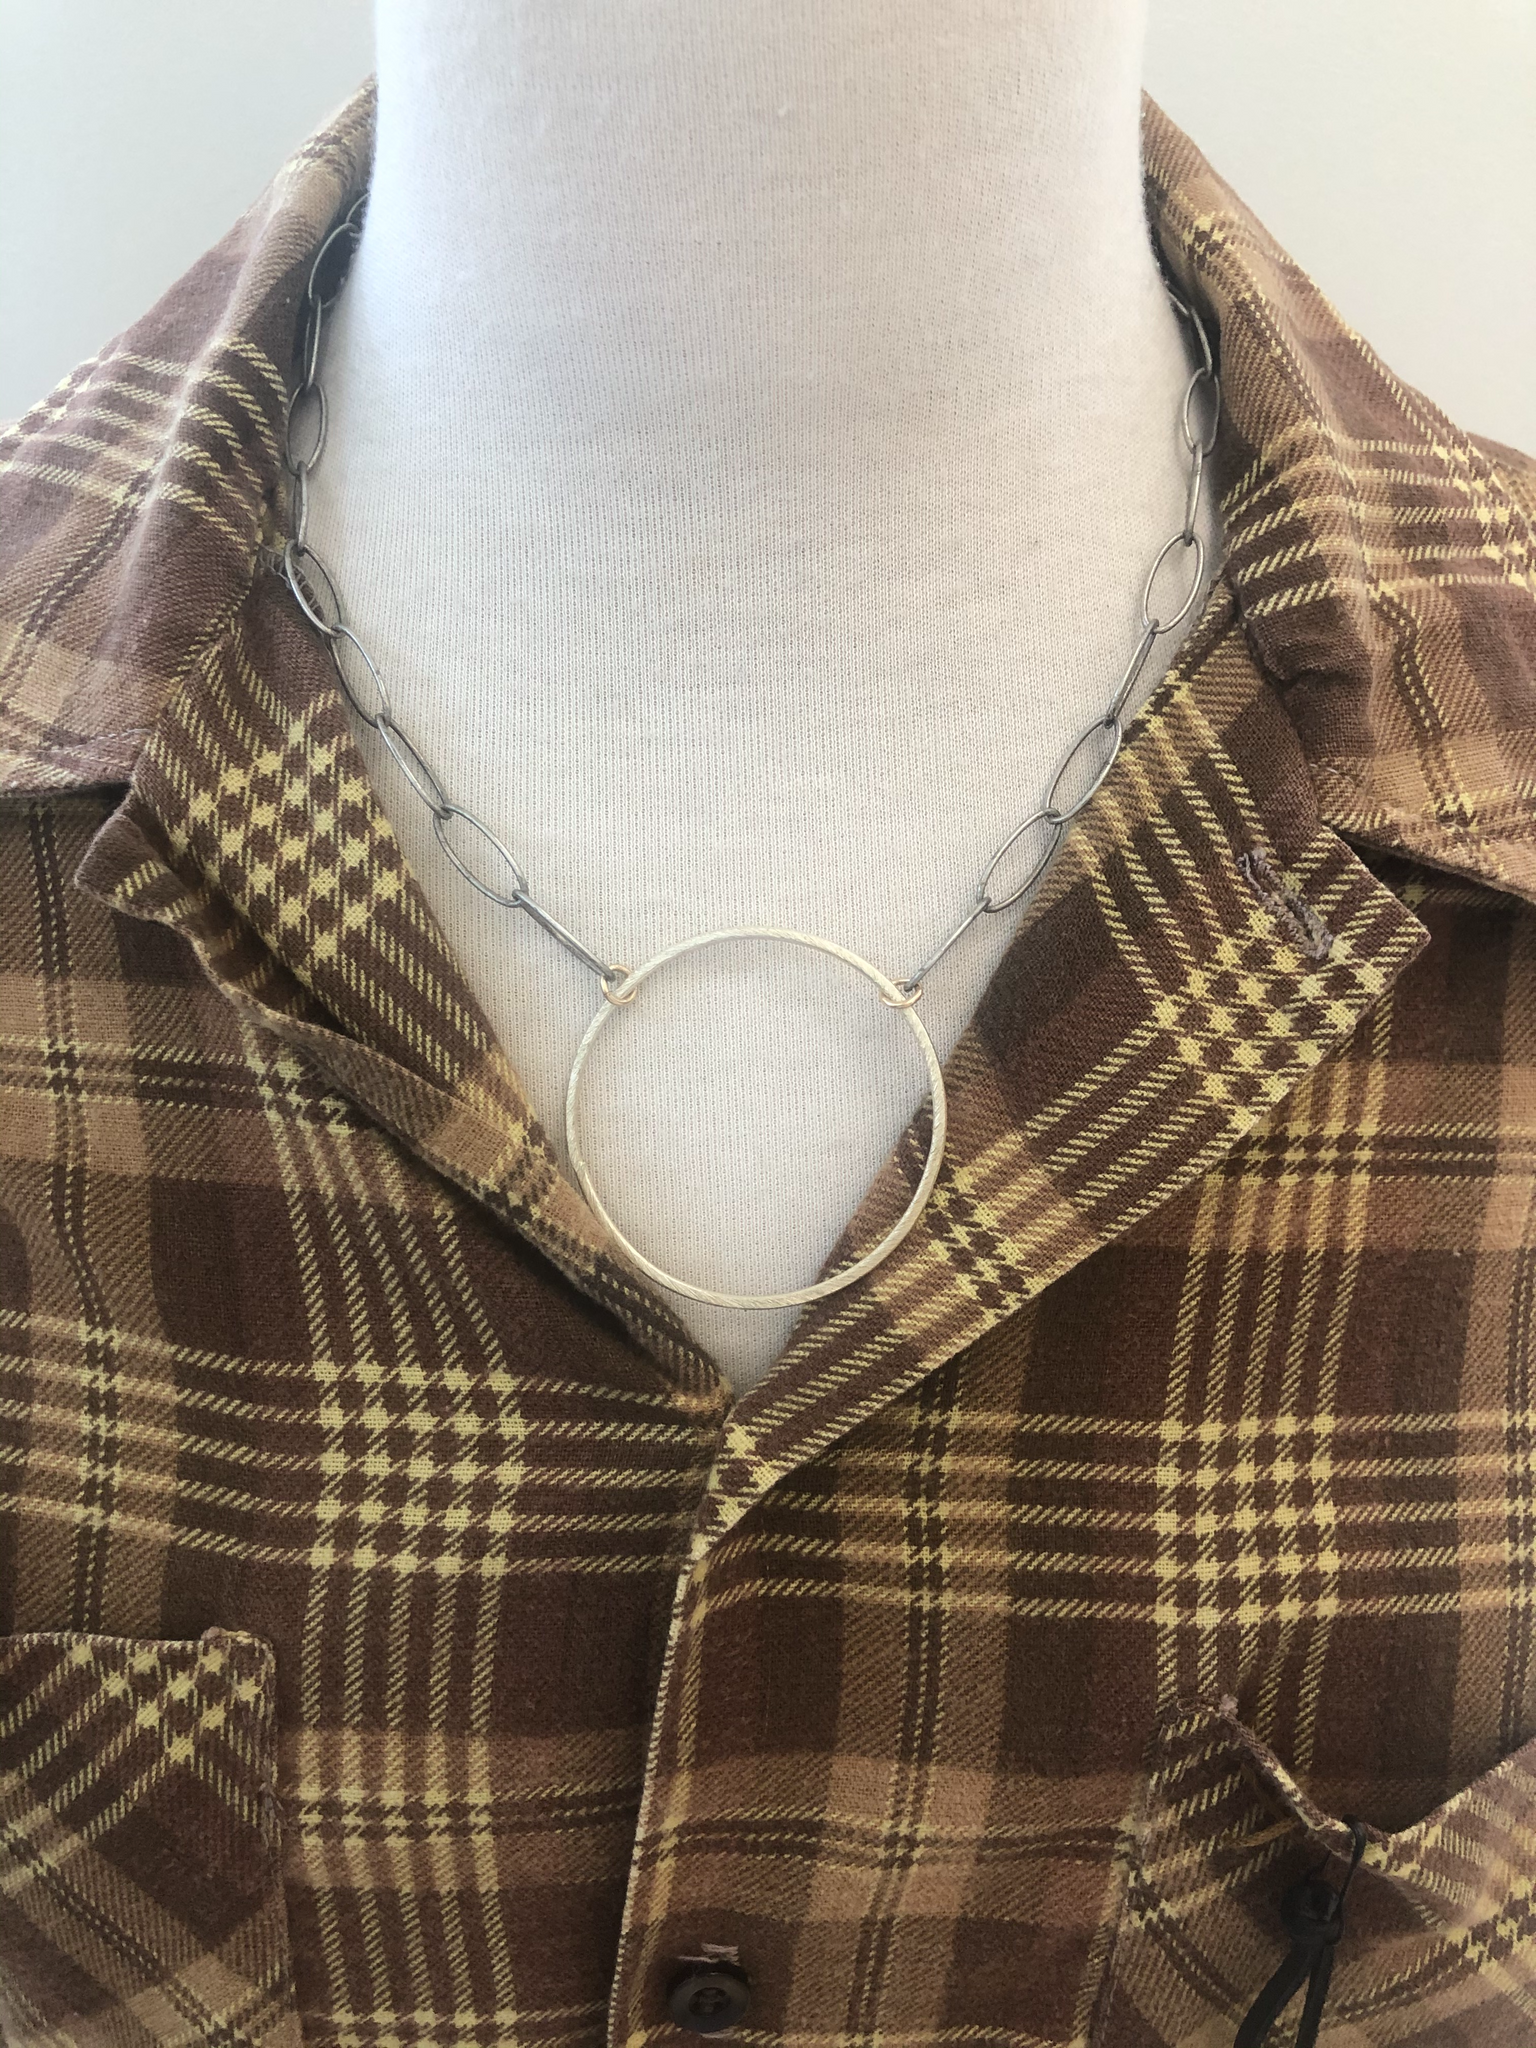 Simple Oversized Circle Necklace